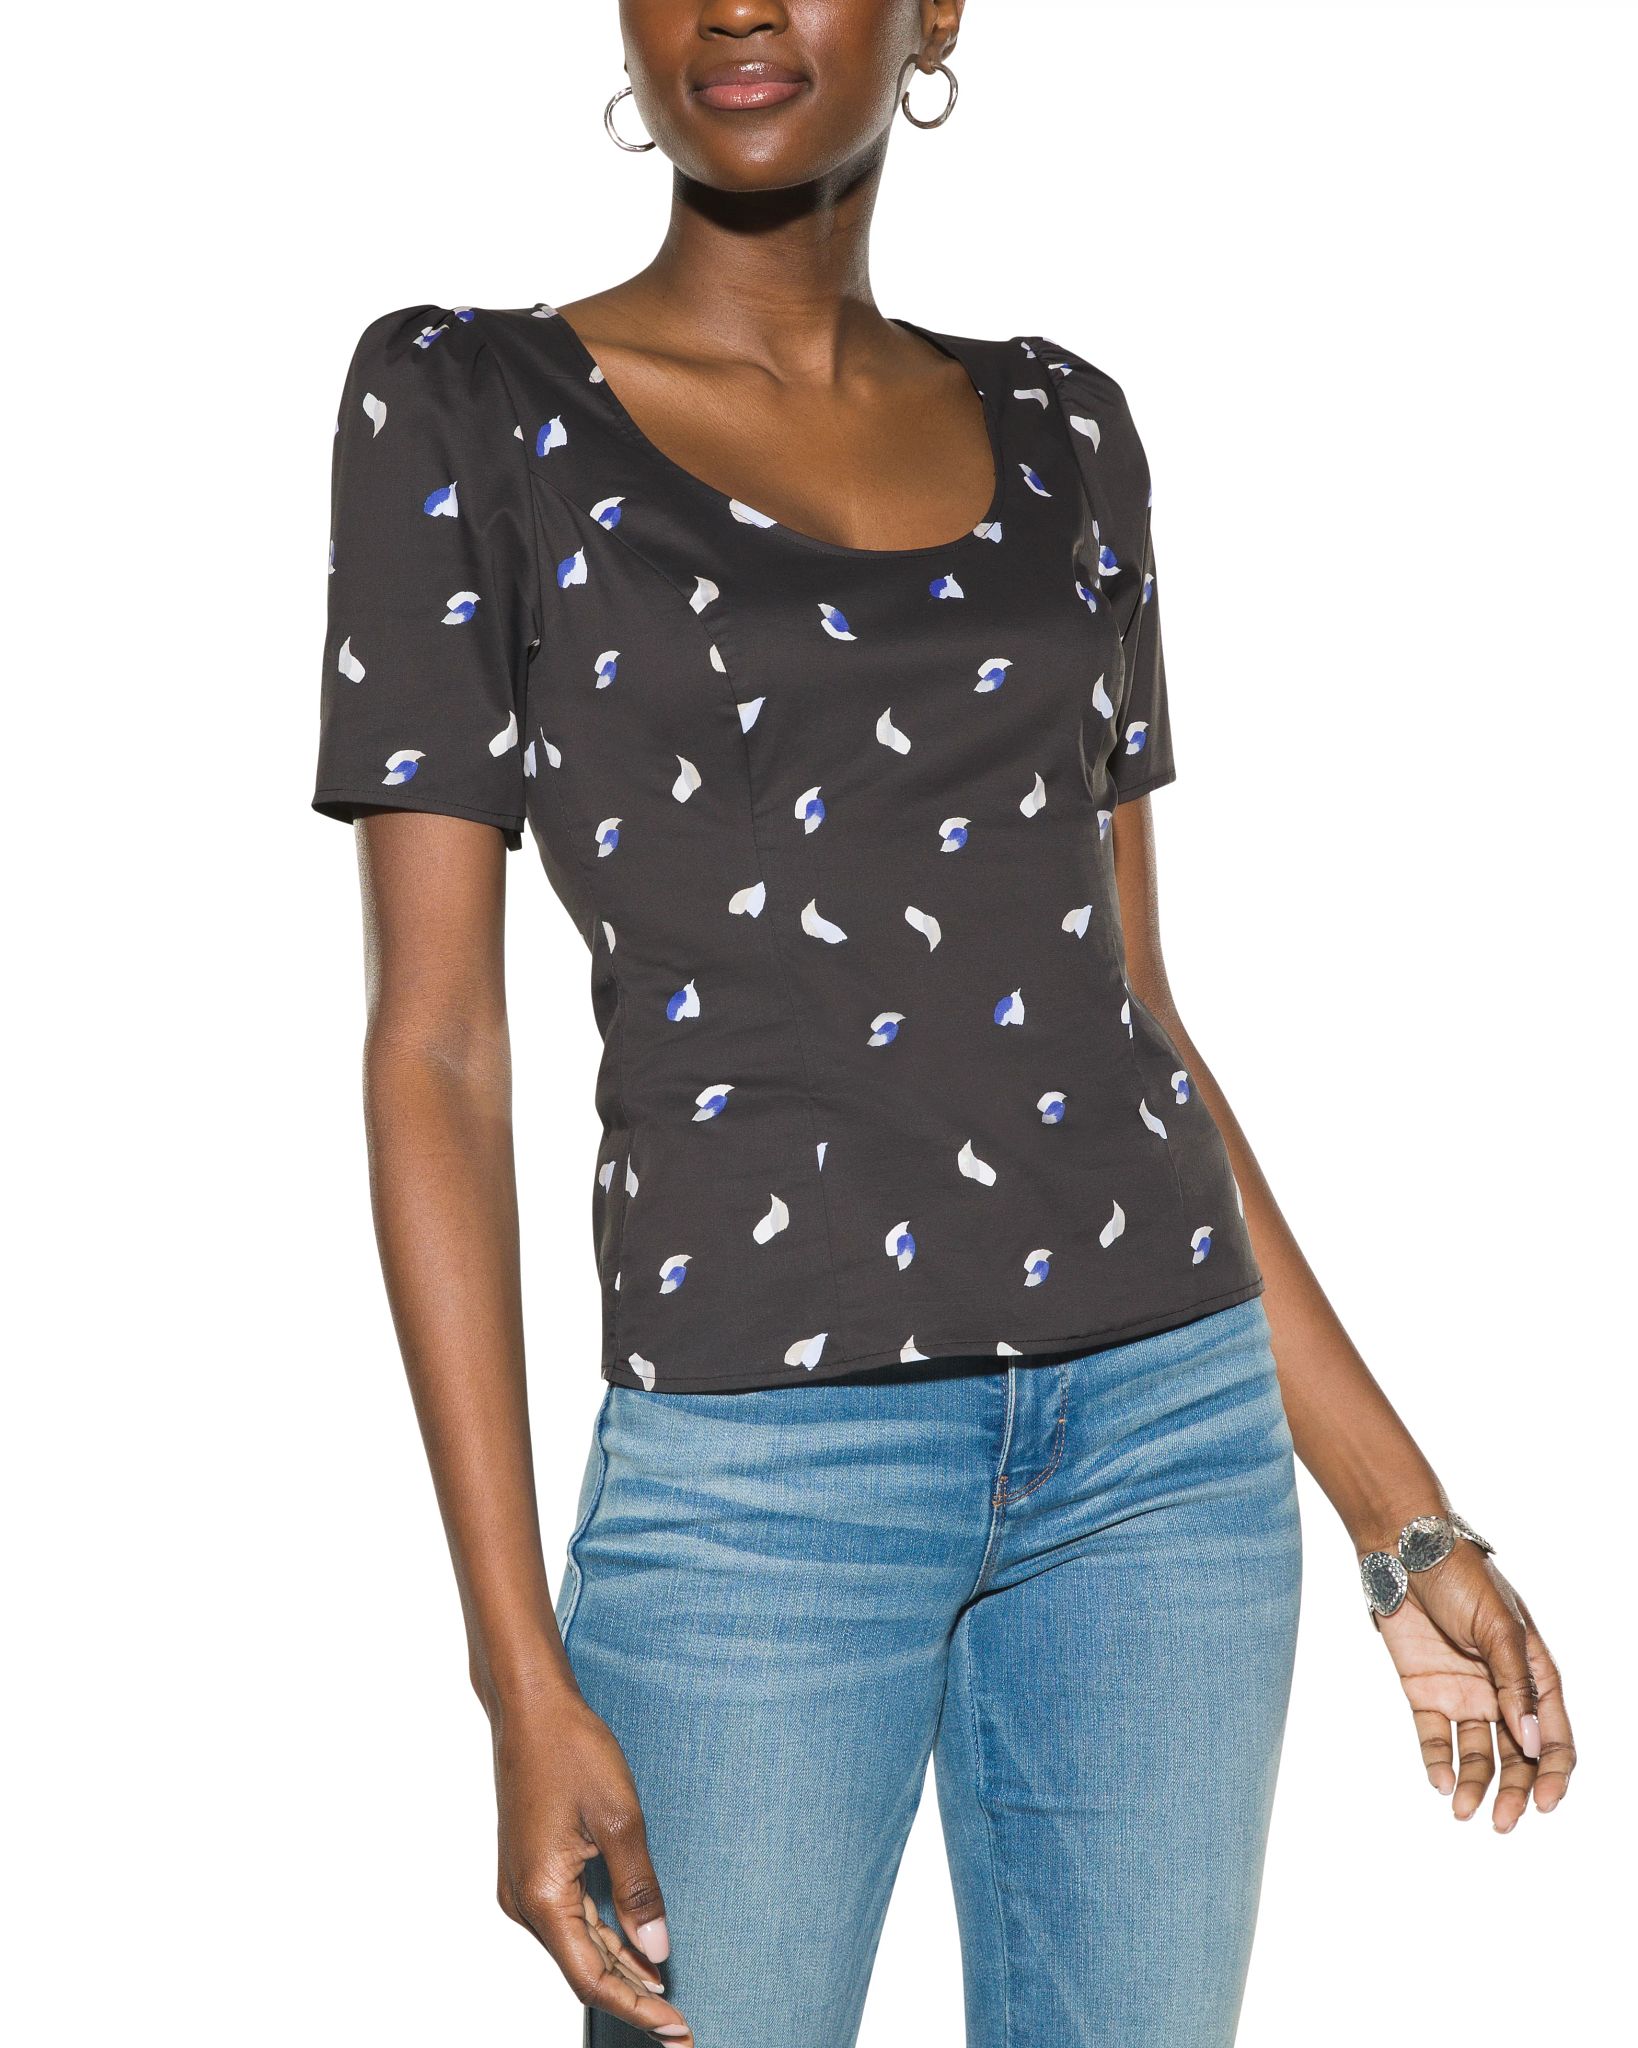 Outlet WHBM Poplin Top